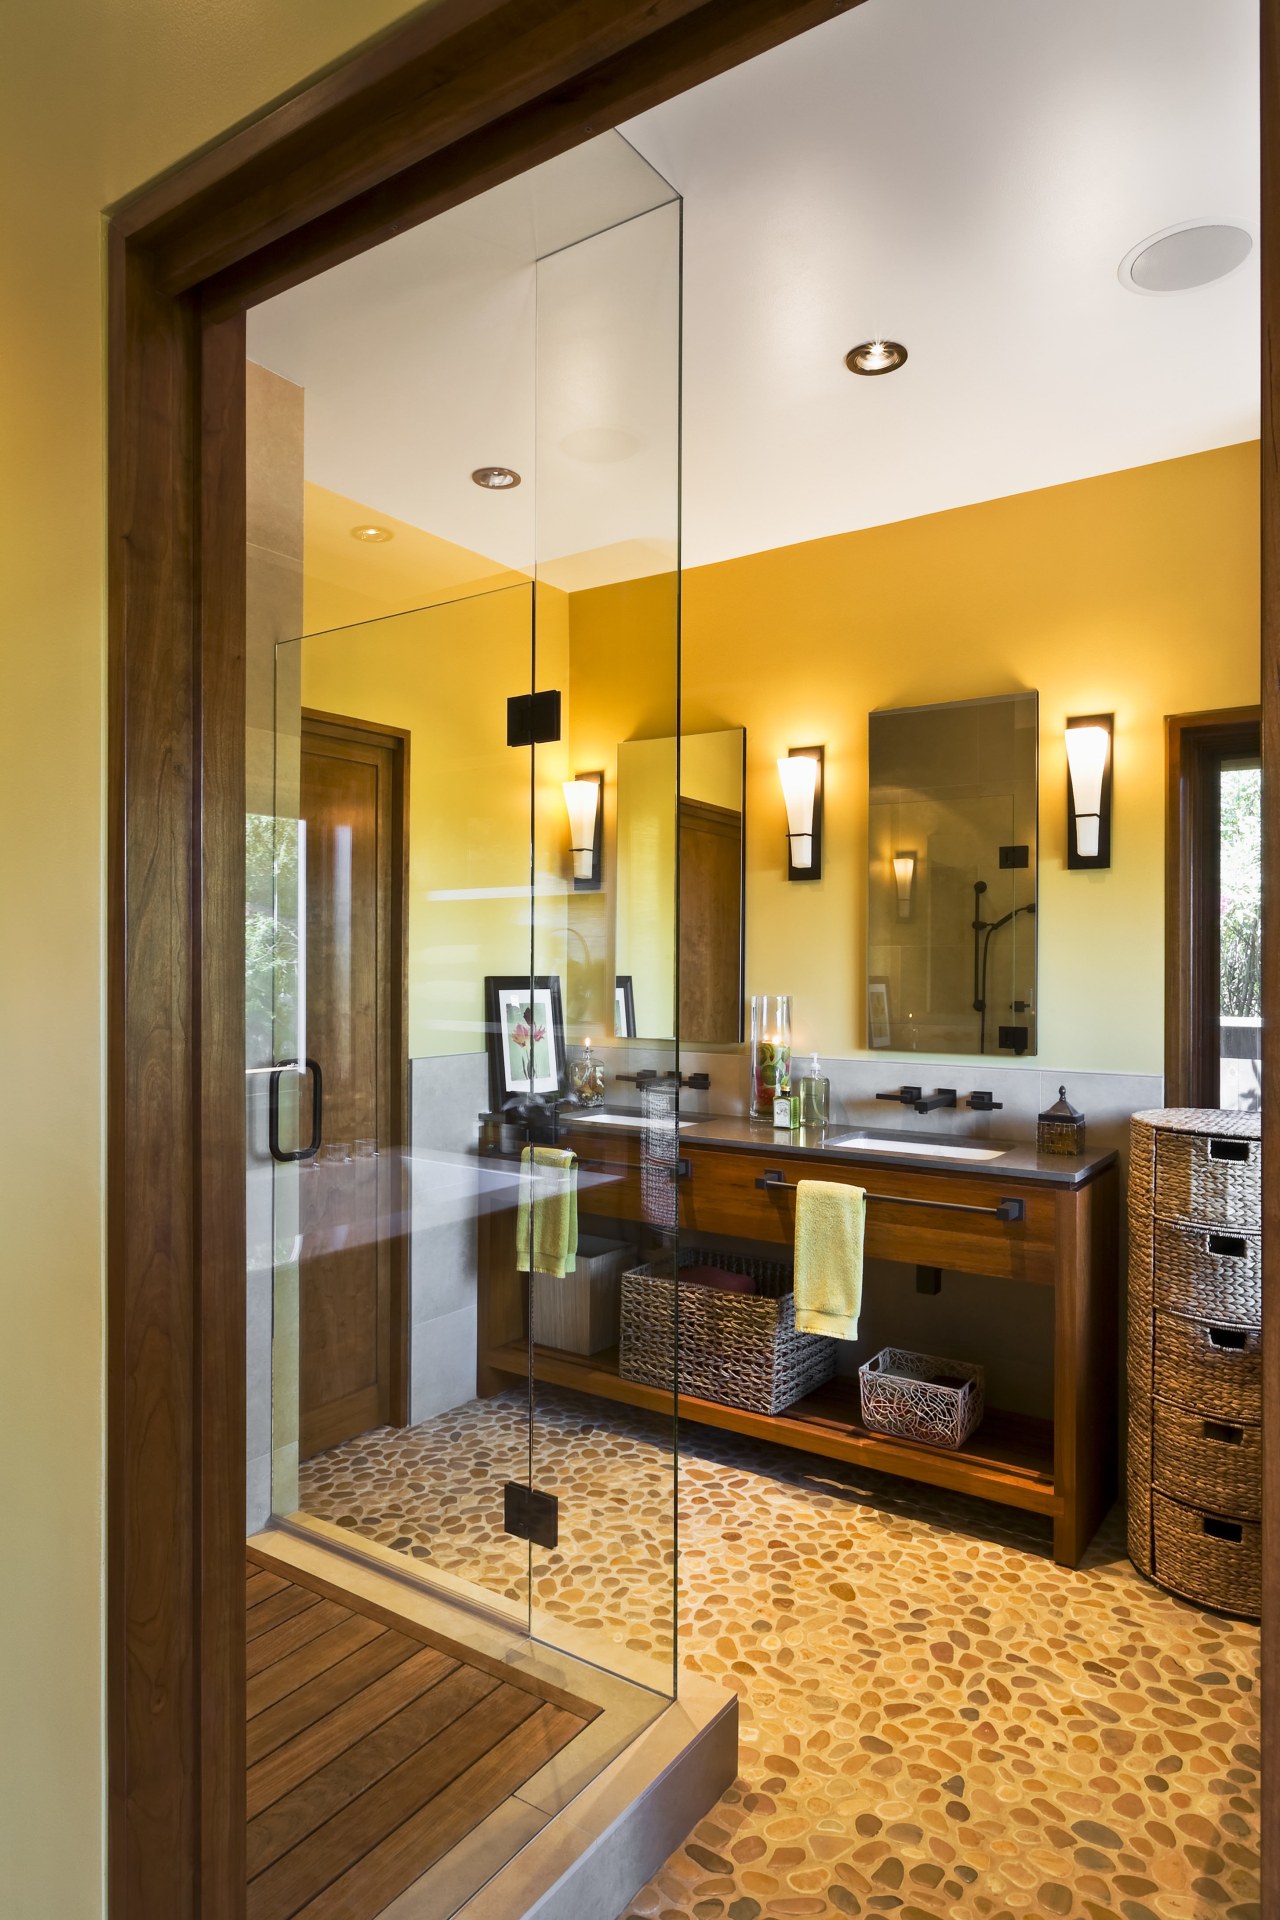 Image of bathroom which features a glass shower bathroom, cabinetry, ceiling, countertop, floor, flooring, home, interior design, kitchen, real estate, room, brown, orange